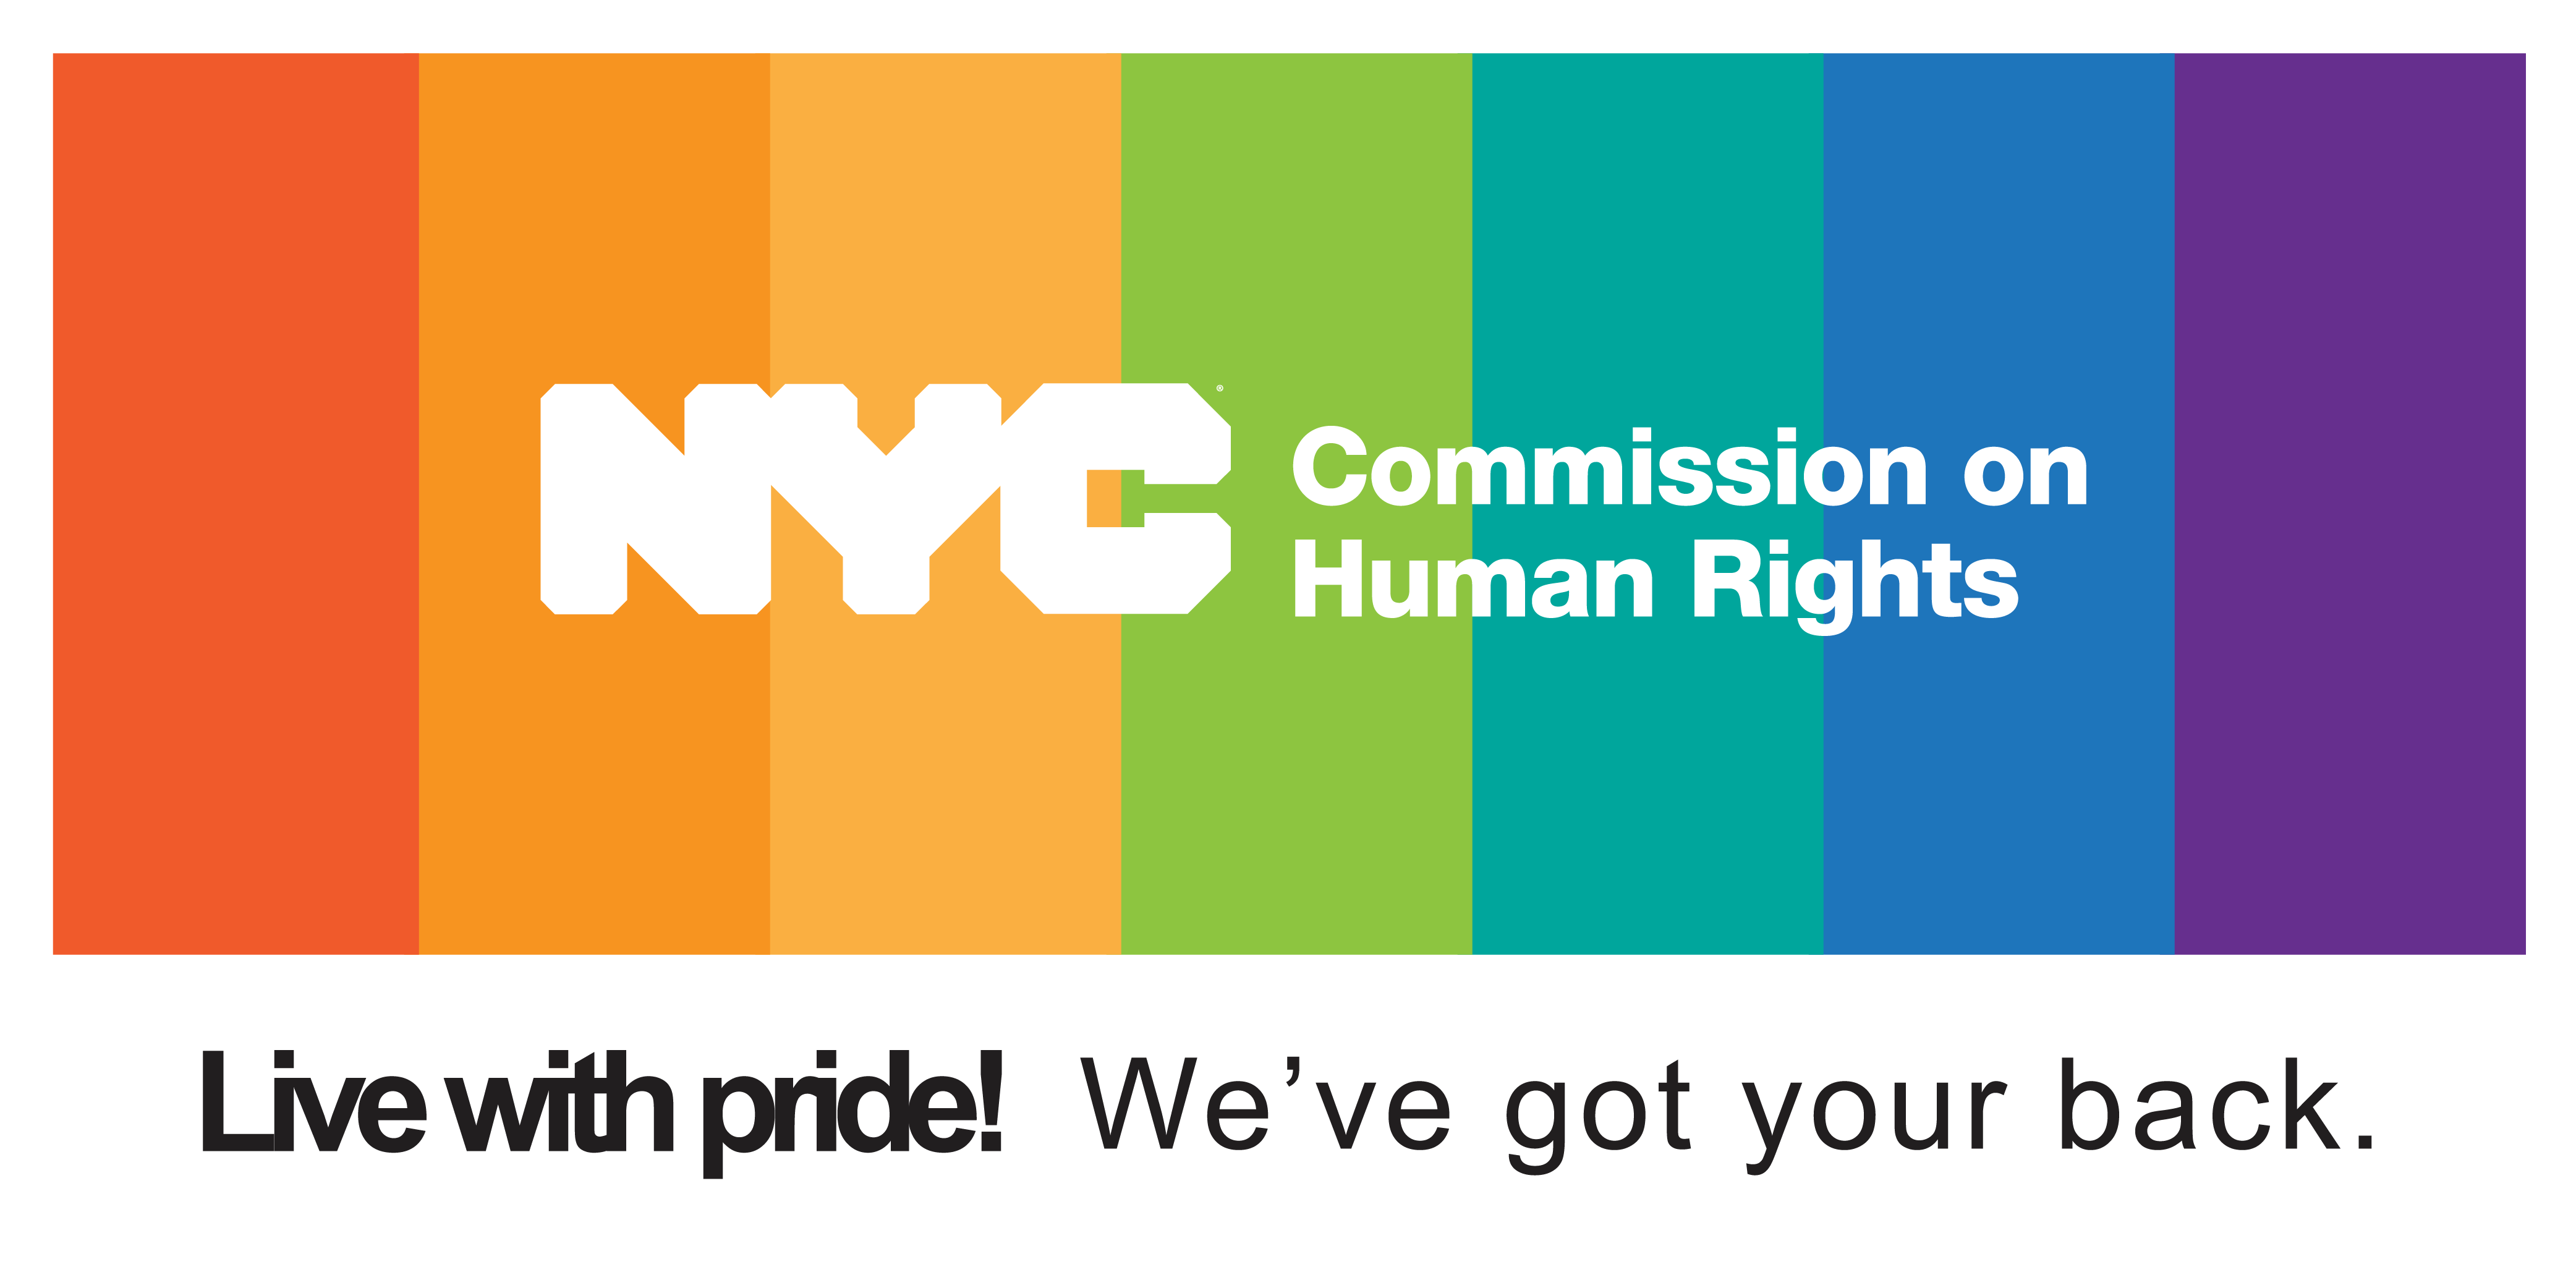 NYC Commision on Human Rights: Live with pride! We've got your back.